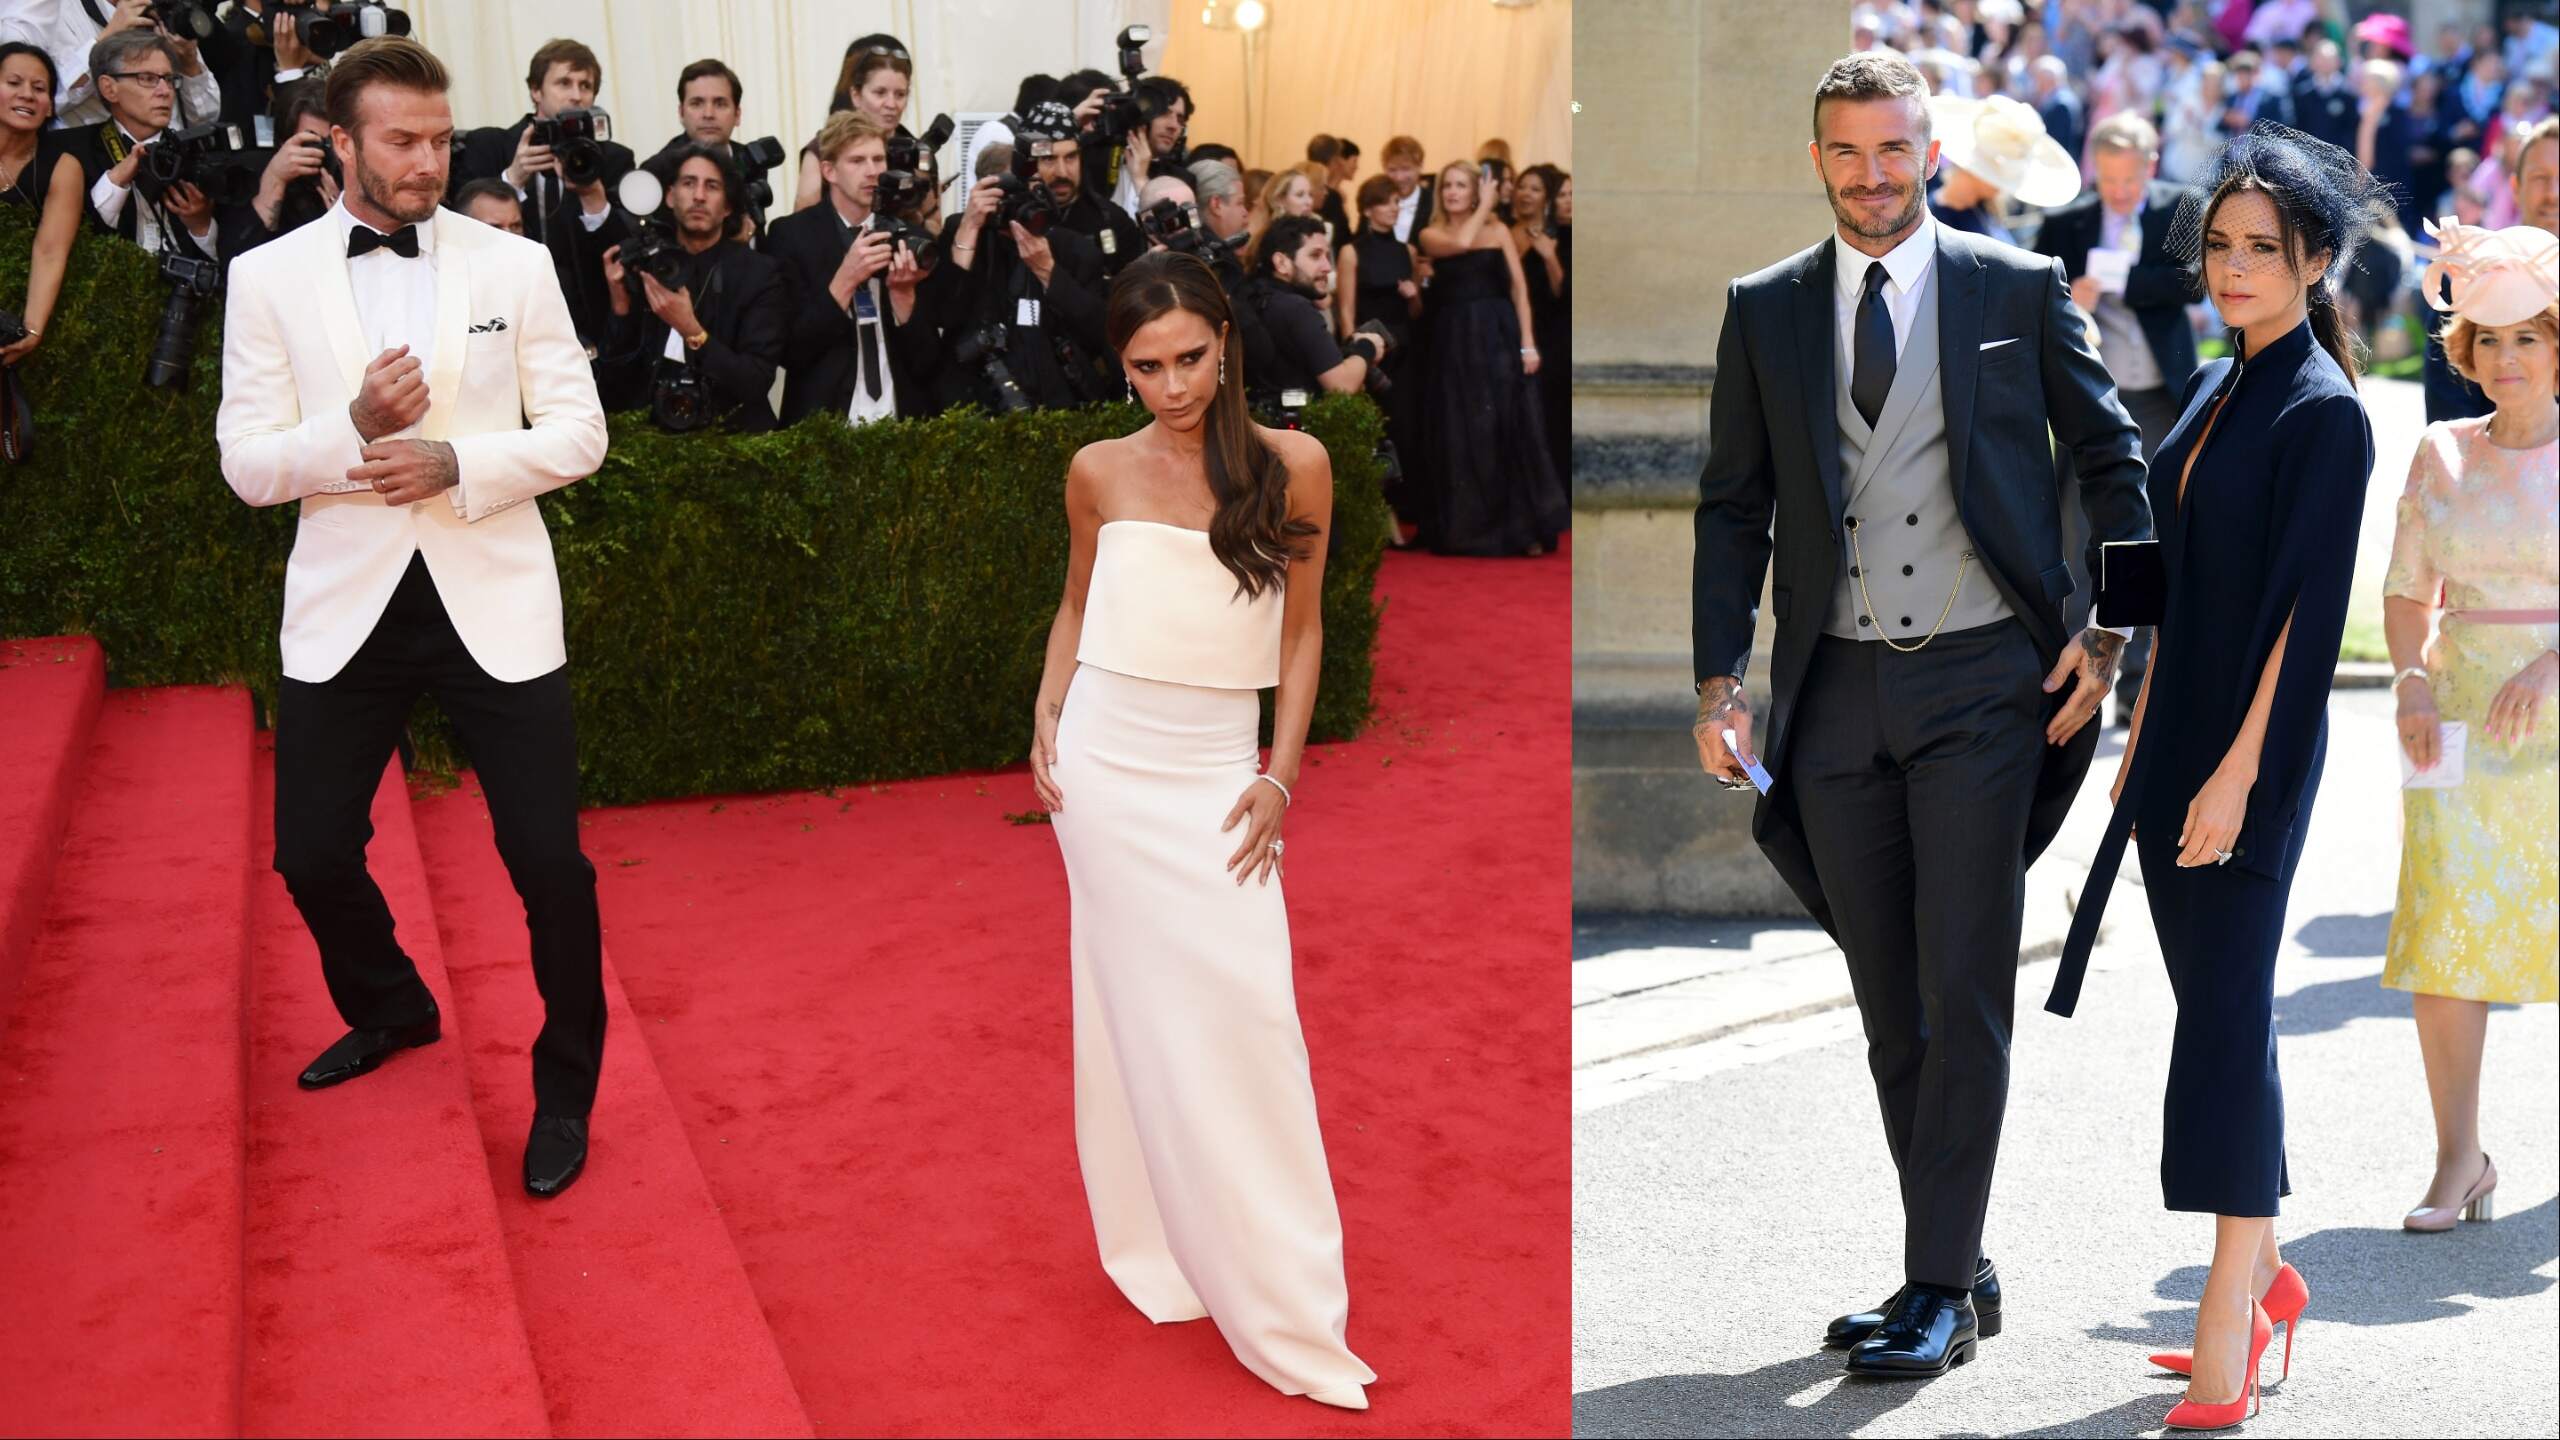 Married couple David Beckham and Victoria Beckham attend the Met Gala 2014 and the royal wedding of Prince Harry and Meghan Markle